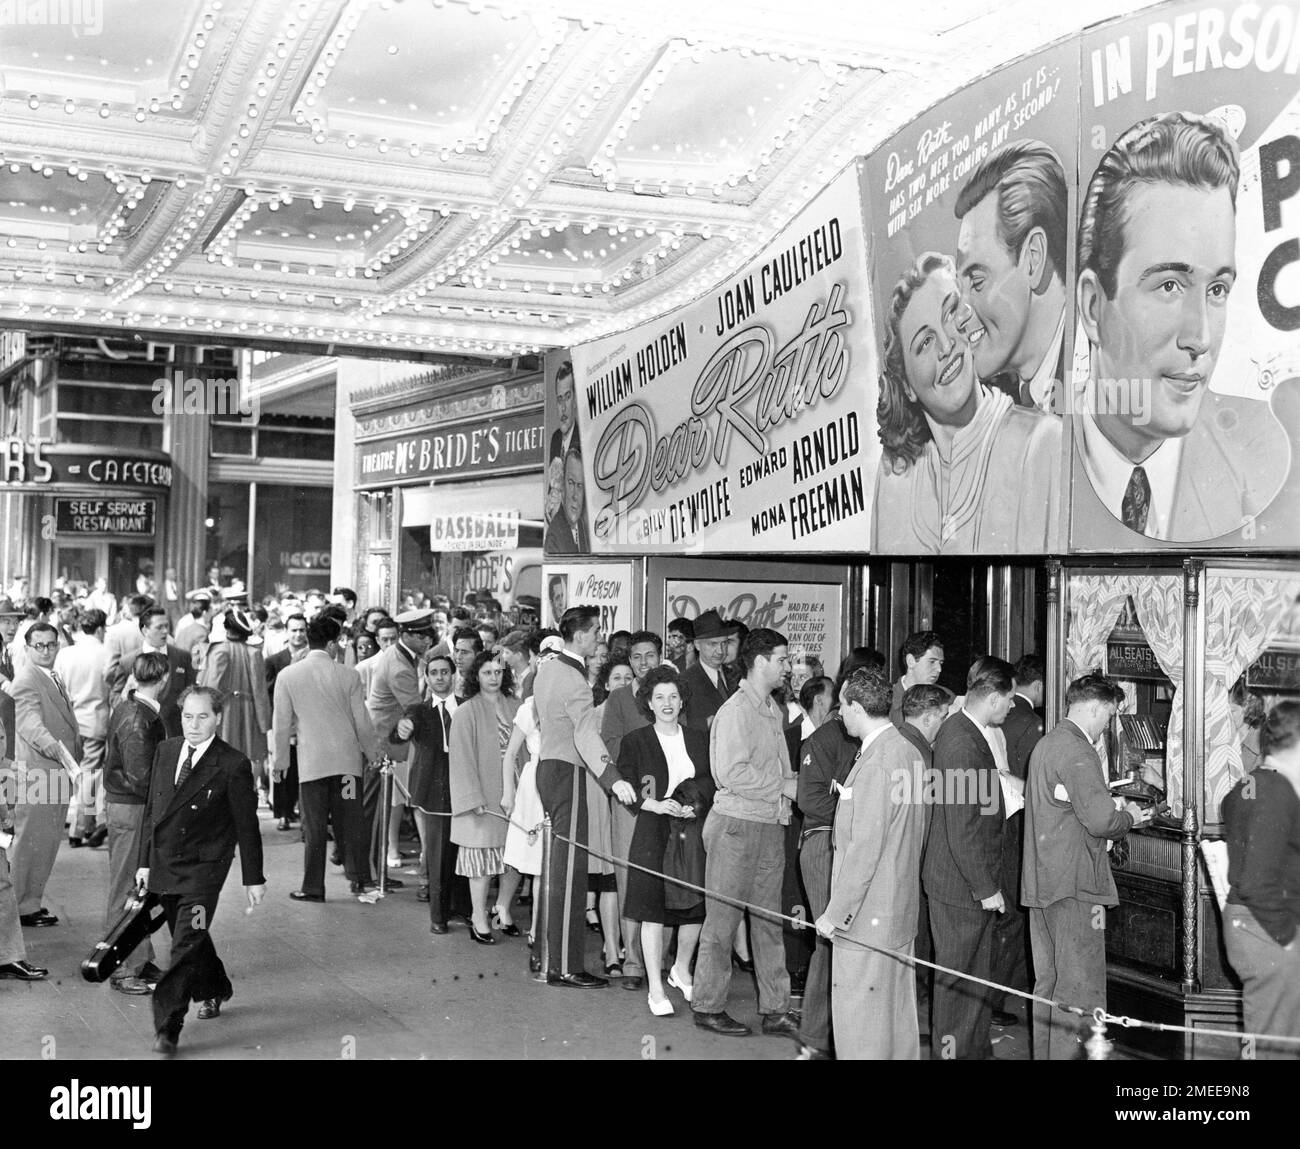 Crowd outside Paramount Movie Theatre in New York showing WILLIAM HOLDEN and JOAN CAULFIELD in DEAR RUTH 1947 director WILLIAM D. RUSSELL play Norman Krasna screenplay Arthur Sheekman Paramount Pictures with In Person Live Appearance by PERRY COMO Stock Photo